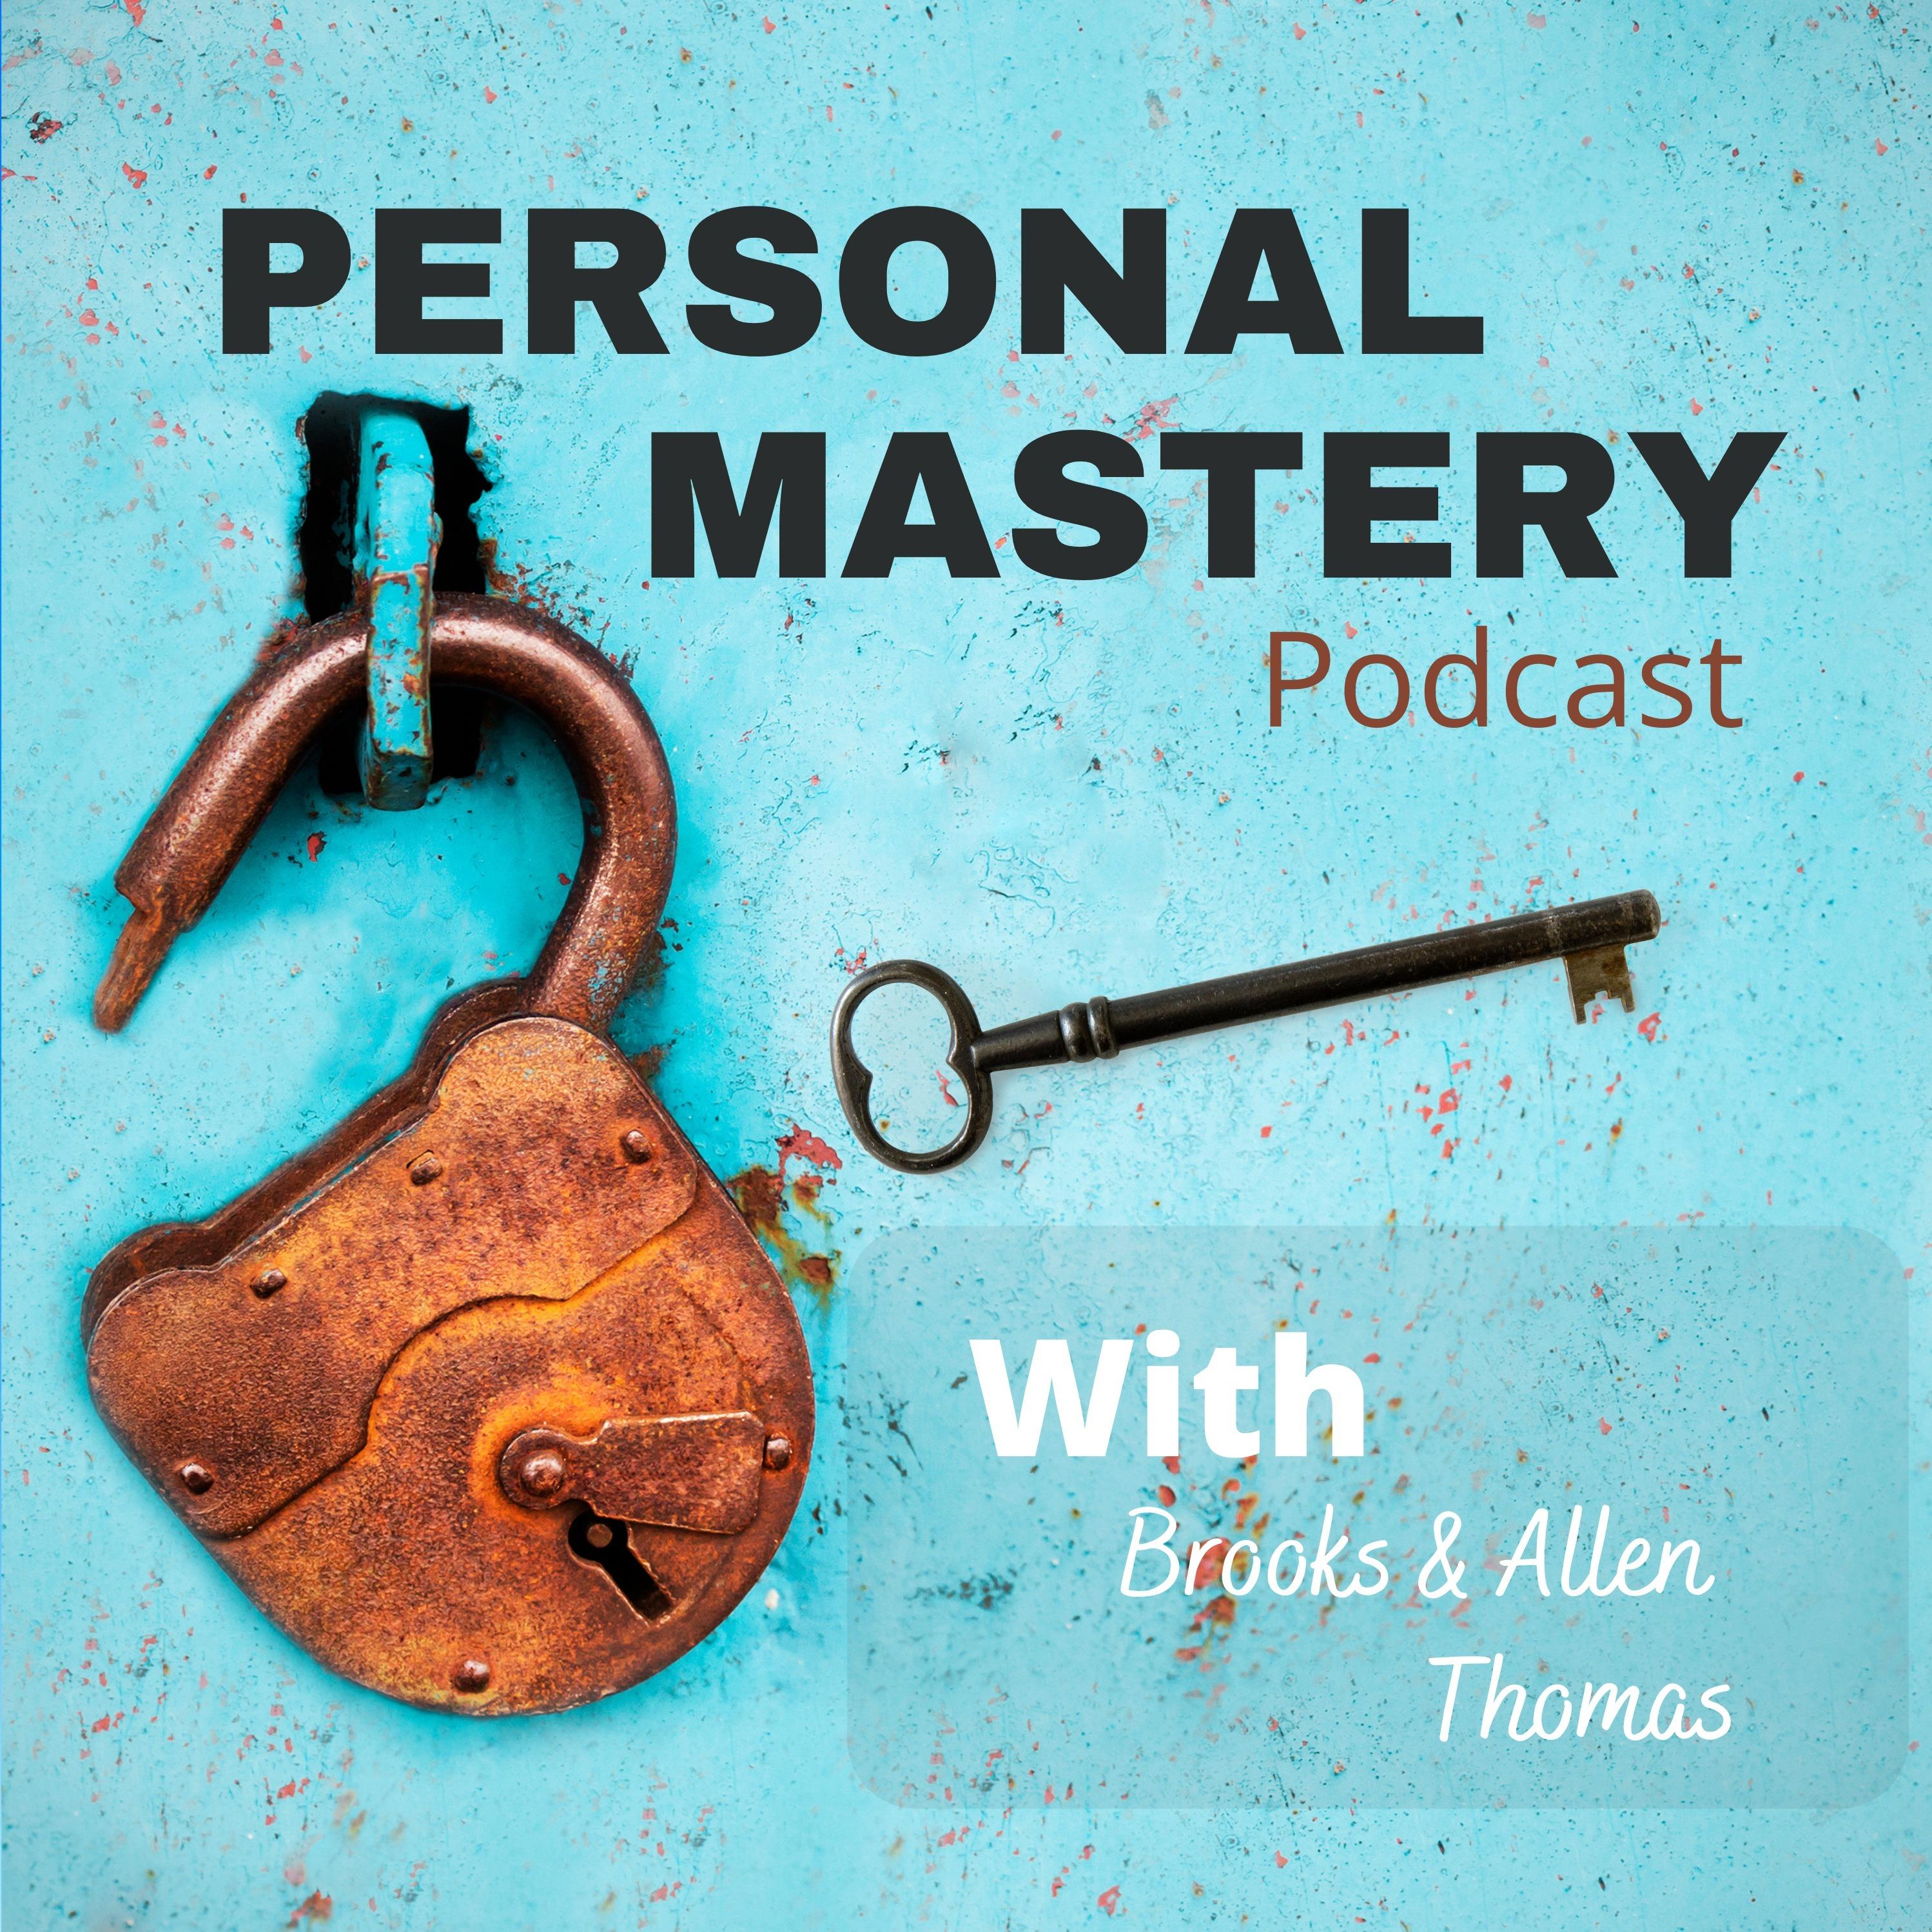 Personal Mastery Podcast